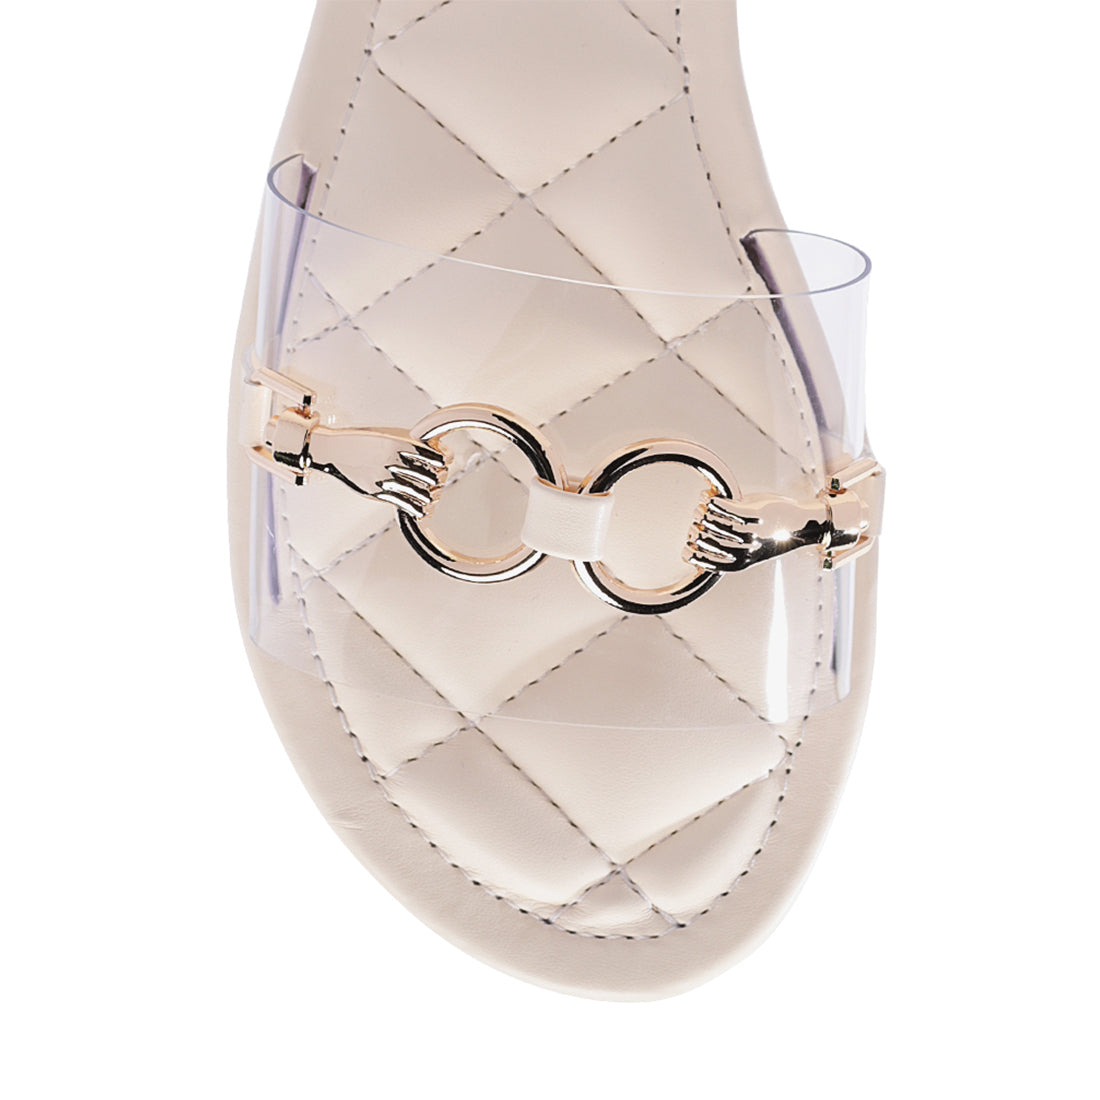 Clear Buckled Quilted Slides in Beige - Beige